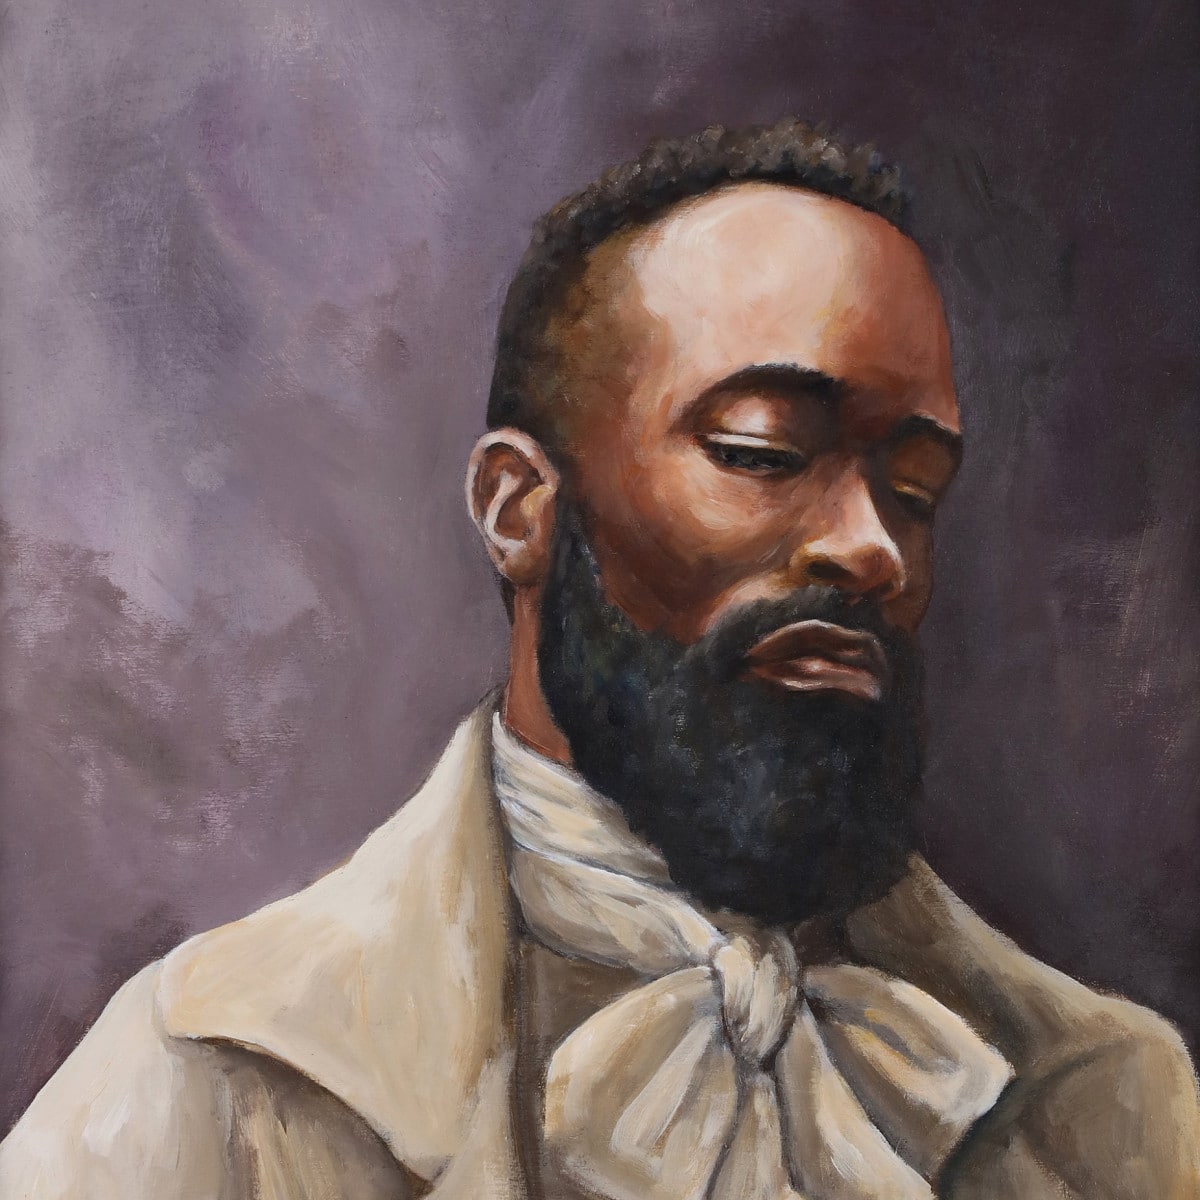 Portrait of a Black man with short hair and a beard. His eyes are closed with a solemn expression on his face. He is wearing a cream coloured day jacket and a shirt with a bow at the neck-line. The garments are as if they were out of the nineteenth century.